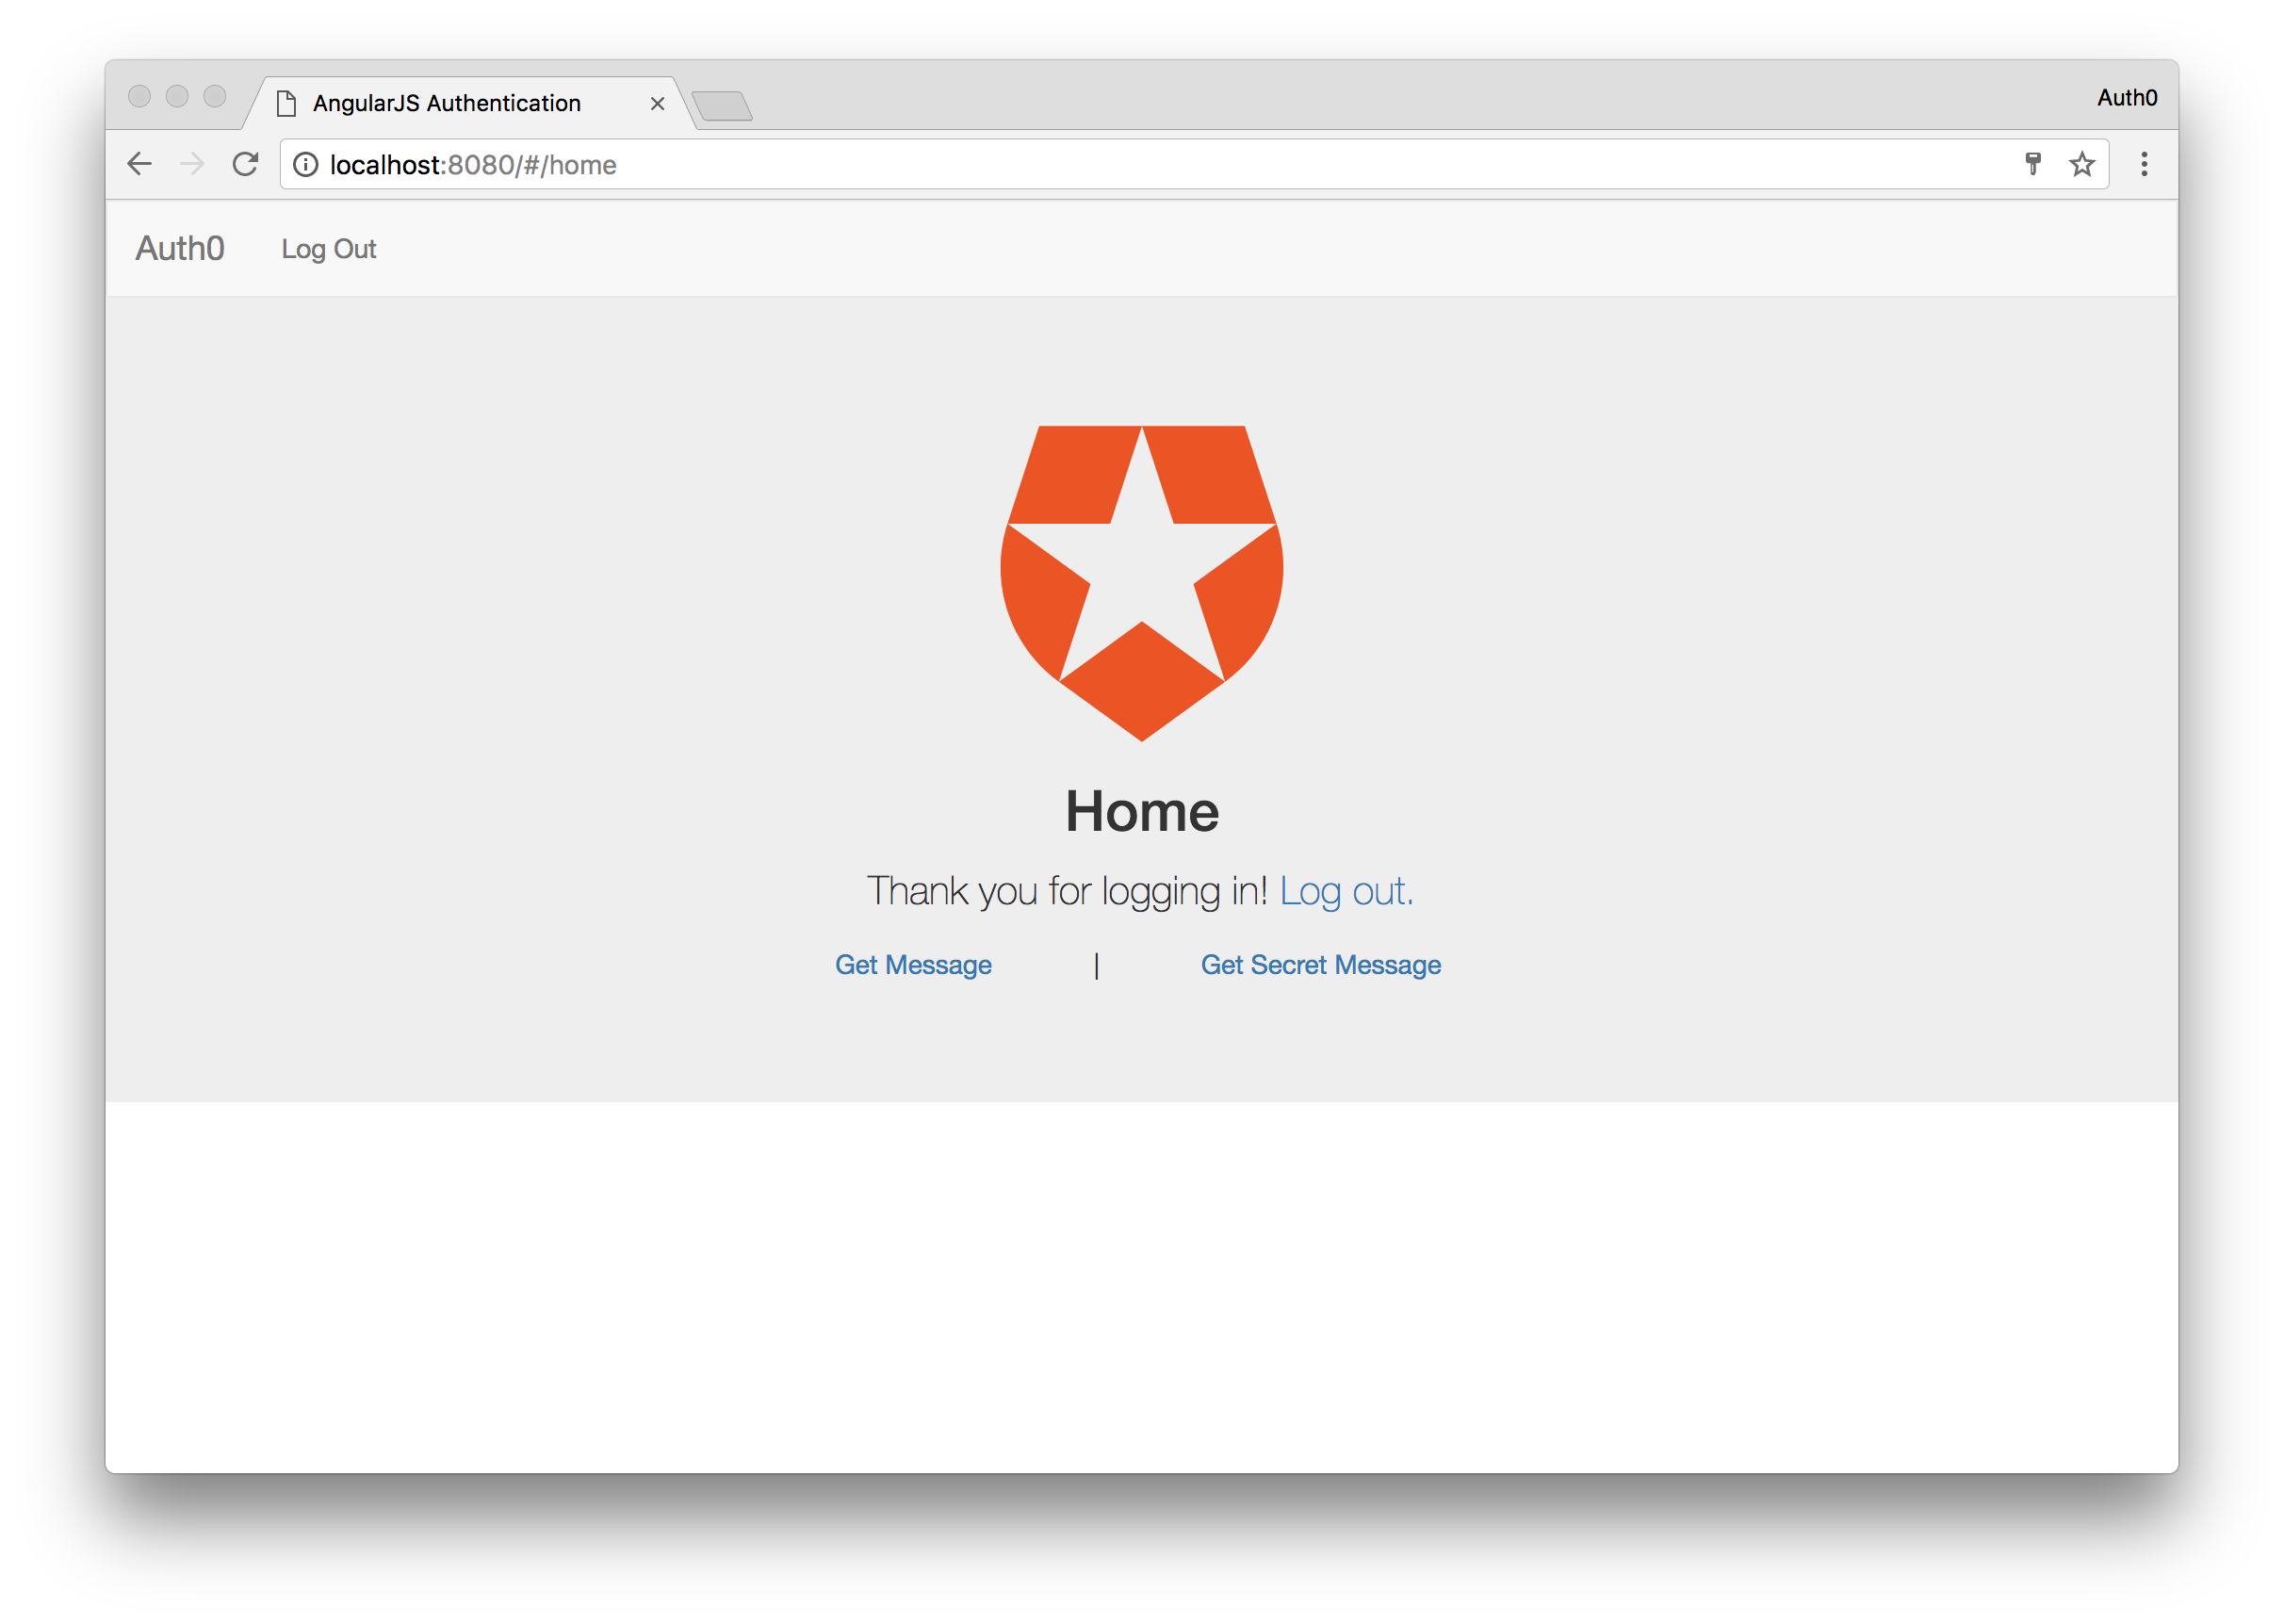 Auth0 logged in